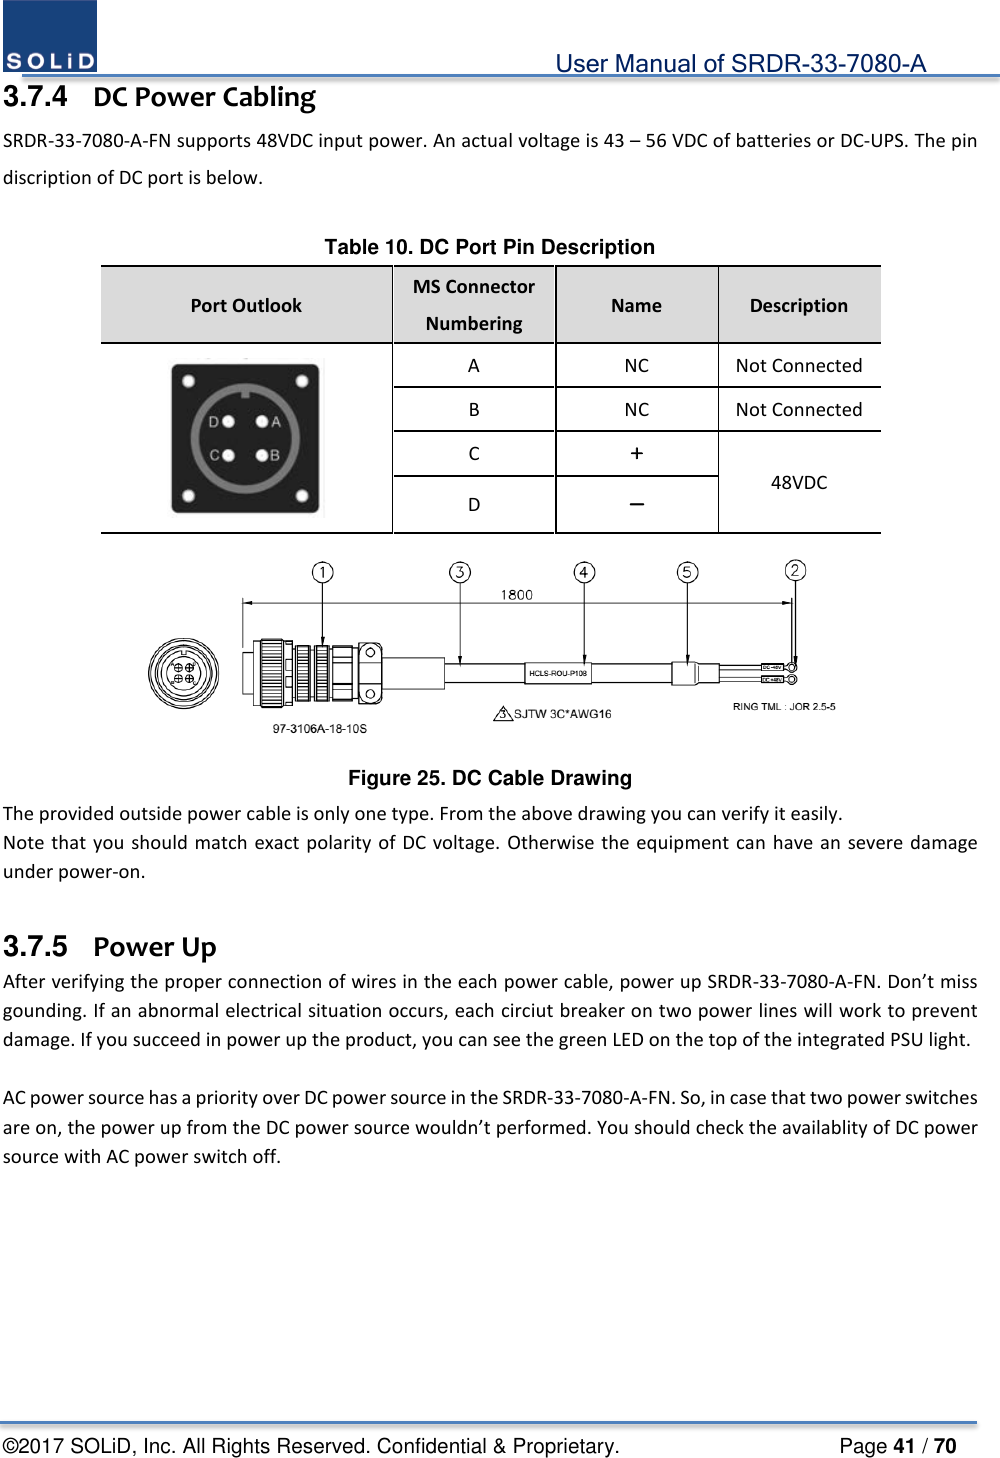                                             User Manual of SRDR-33-7080-A ©2017 SOLiD, Inc. All Rights Reserved. Confidential &amp; Proprietary.                     Page 41 / 70 3.7.4  DC Power Cabling SRDR-33-7080-A-FN supports 48VDC input power. An actual voltage is 43 – 56 VDC of batteries or DC-UPS. The pin discription of DC port is below.  Table 10. DC Port Pin Description Port Outlook MS Connector Numbering Name  Description  A  NC Not Connected B  NC Not Connected C ＋ 48VDC D －  Figure 25. DC Cable Drawing The provided outside power cable is only one type. From the above drawing you can verify it easily.   Note that you should match exact polarity of DC voltage. Otherwise the equipment can have an severe damage under power-on.  3.7.5   Power Up After verifying the proper connection of wires in the each power cable, power up SRDR-33-7080-A-FN. Don’t miss gounding. If an abnormal electrical situation occurs, each circiut breaker on two power lines will work to prevent damage. If you succeed in power up the product, you can see the green LED on the top of the integrated PSU light.  AC power source has a priority over DC power source in the SRDR-33-7080-A-FN. So, in case that two power switches are on, the power up from the DC power source wouldn’t performed. You should check the availablity of DC power source with AC power switch off.    